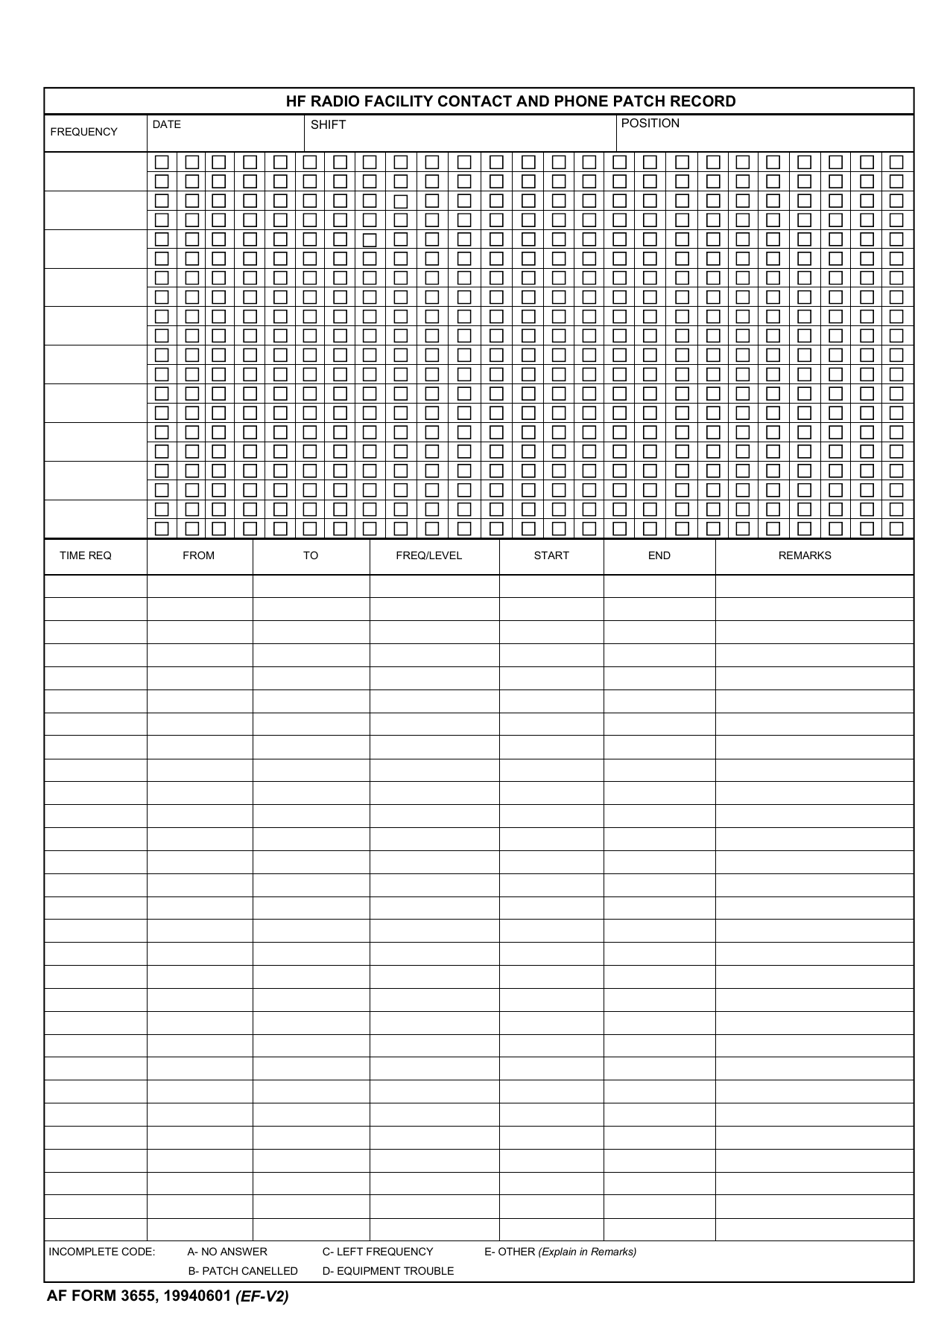 AF Form 3655 Hf Radio Facility Contact and Phone Patch Record, Page 1